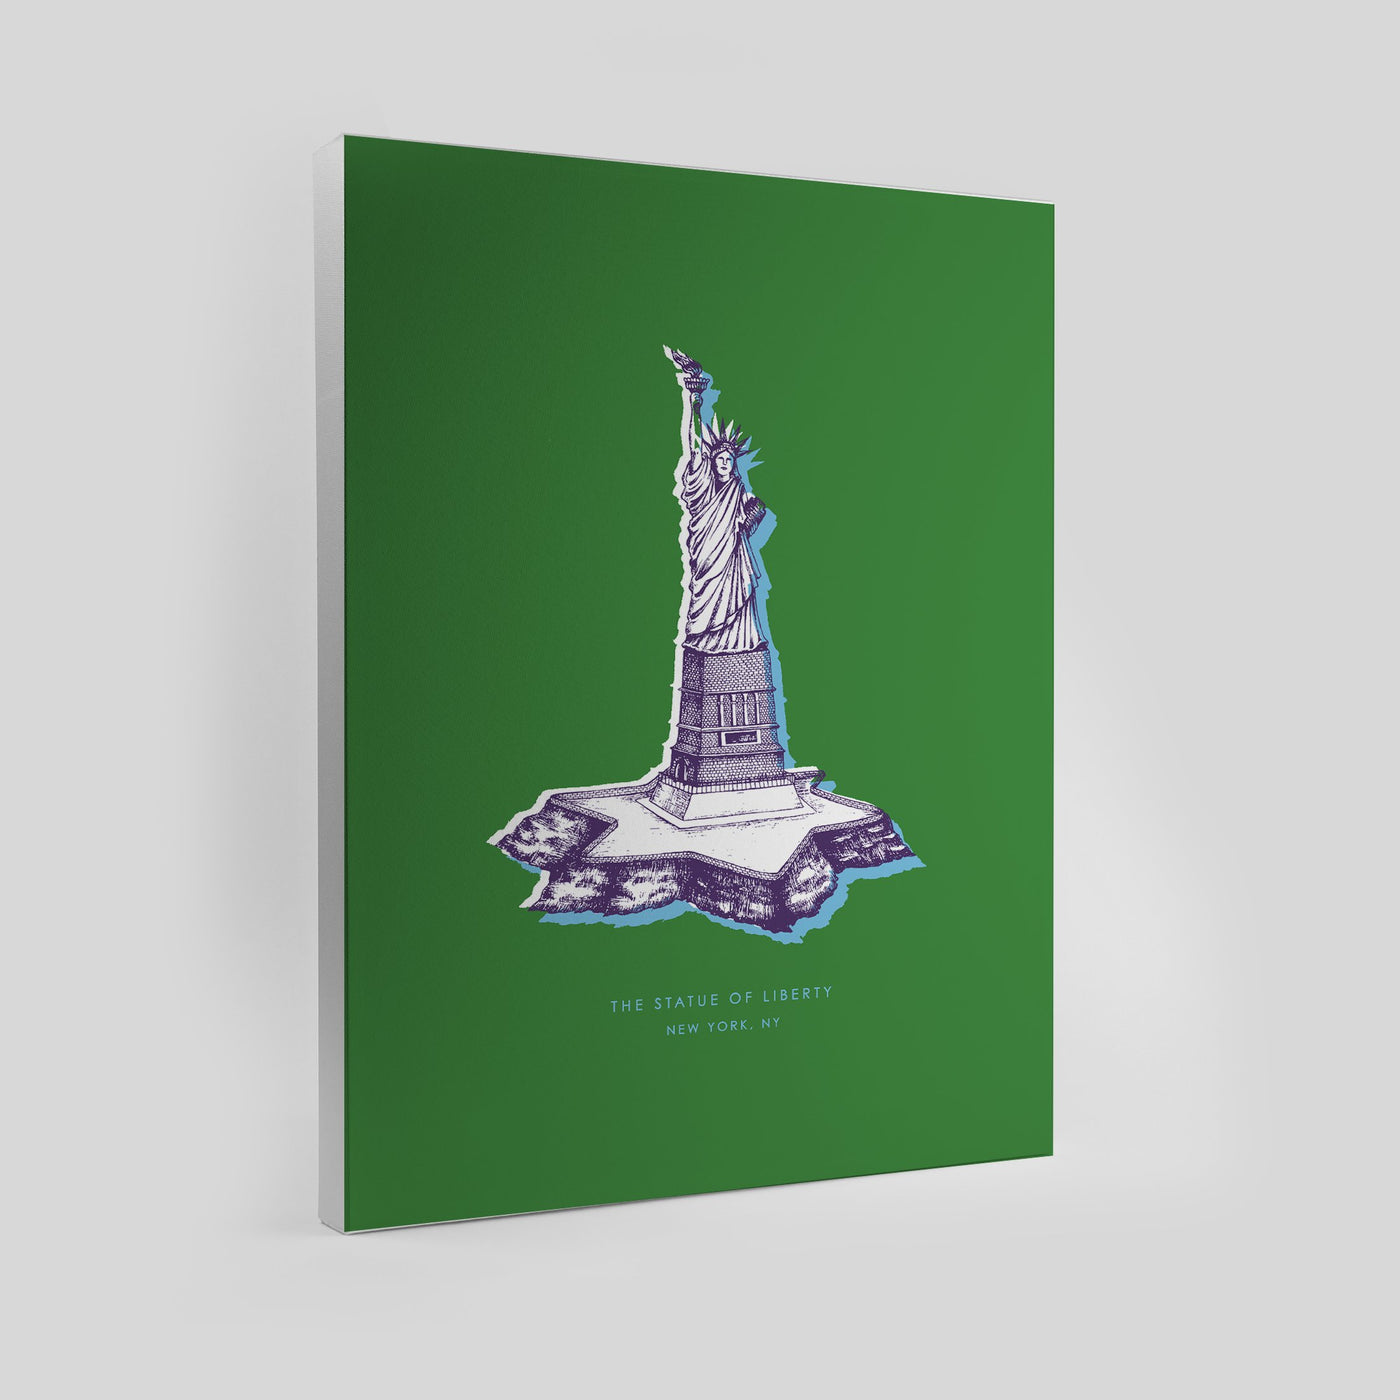 New York Statue of Liberty Print Gallery Print Green Canvas / 8x10 / Unframed Katie Kime